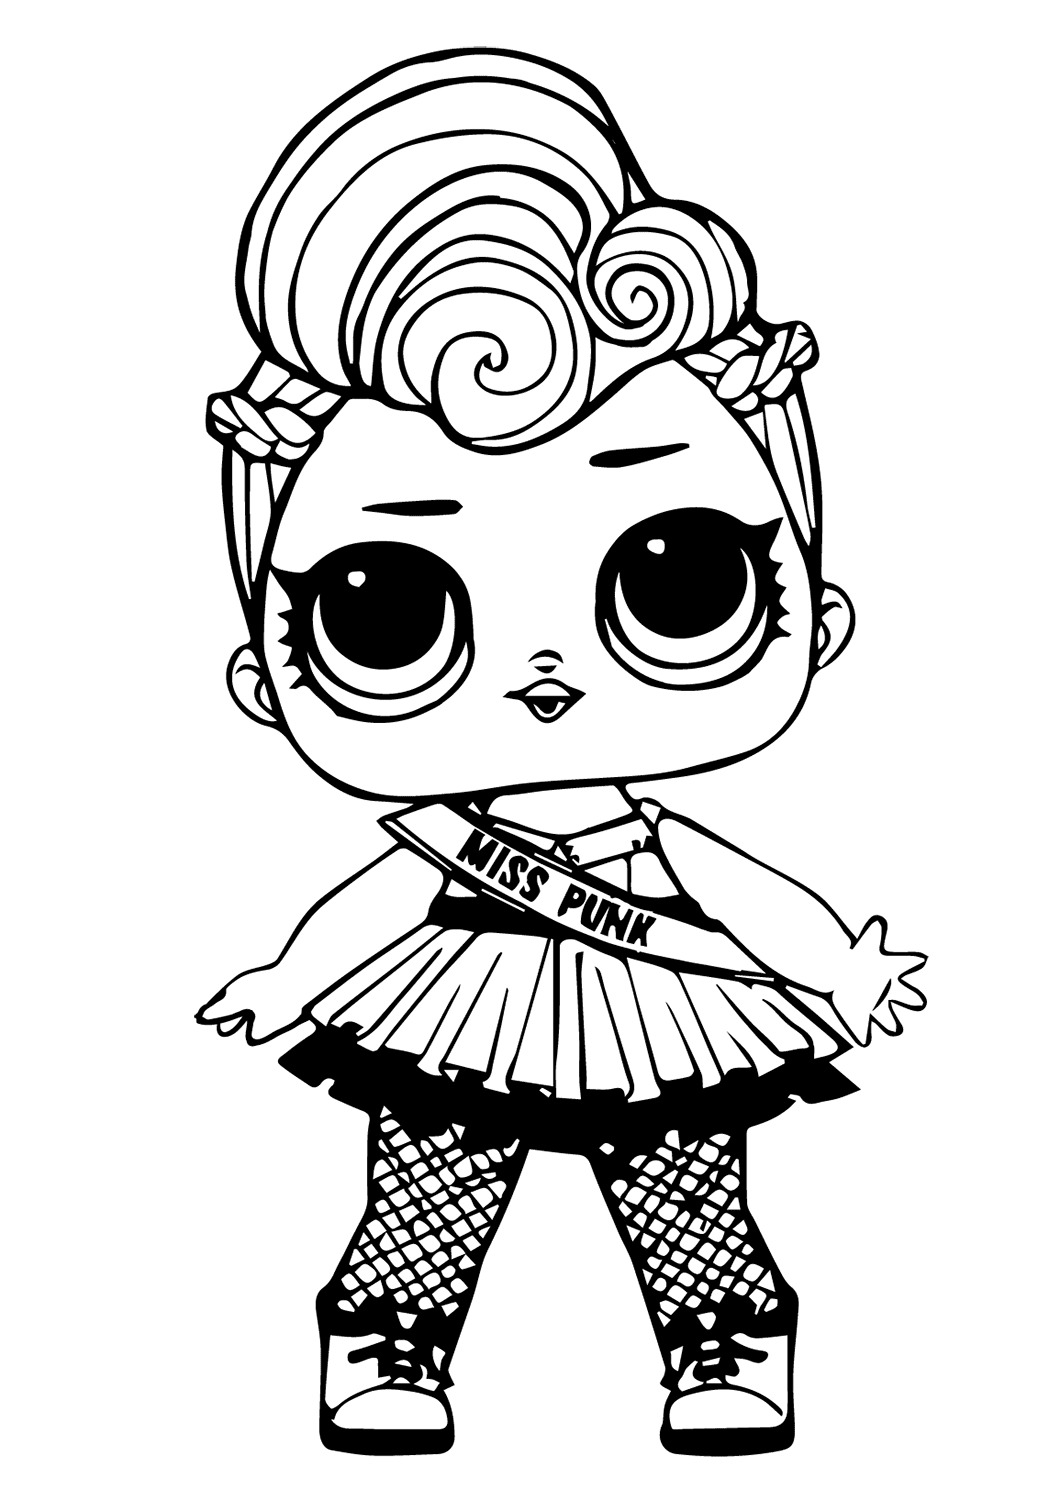 Lol Suprise Doll Miss Punk Coloring Page